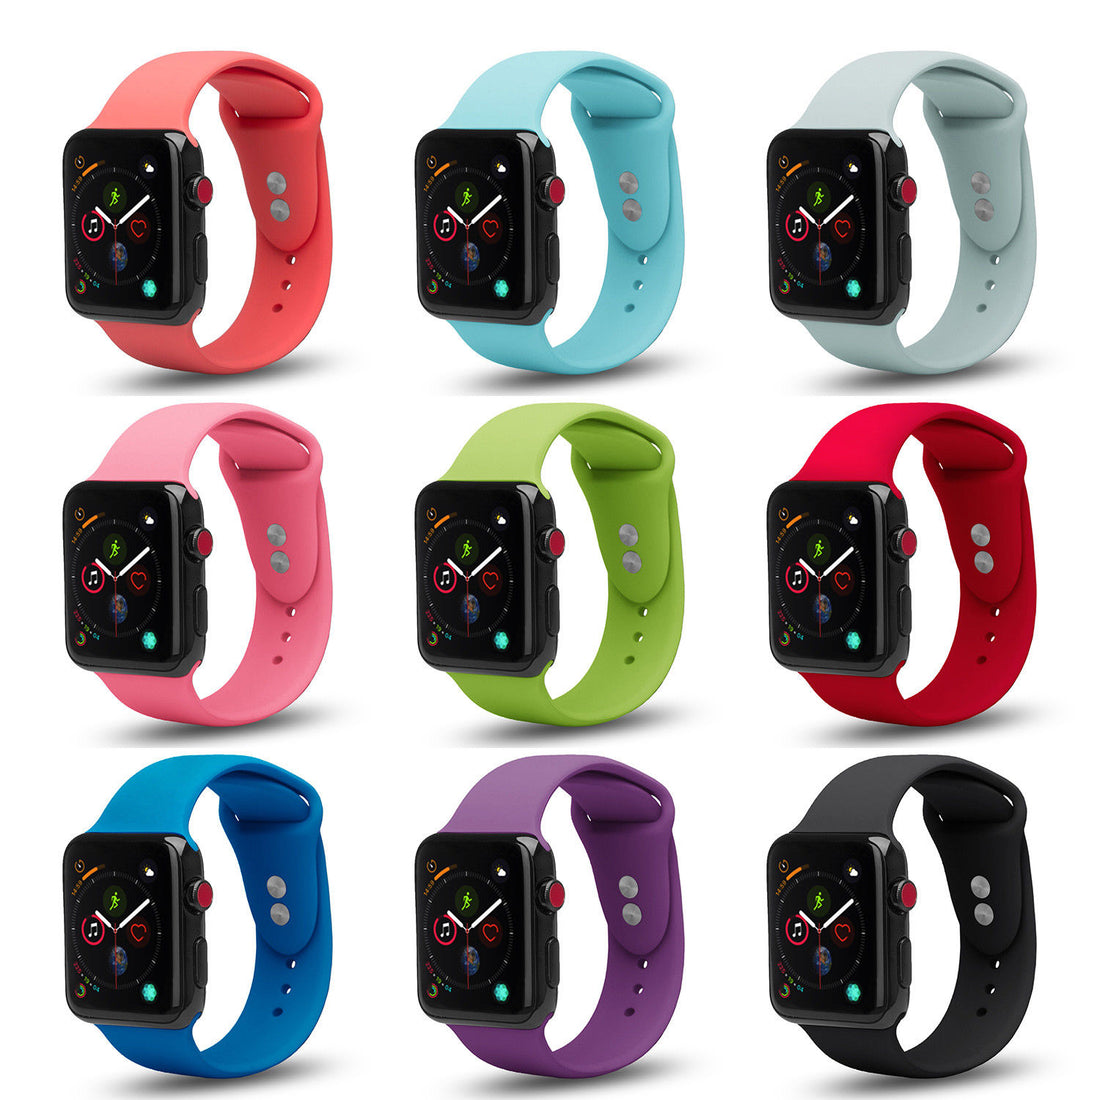 What size is apple watch bands 40mm?